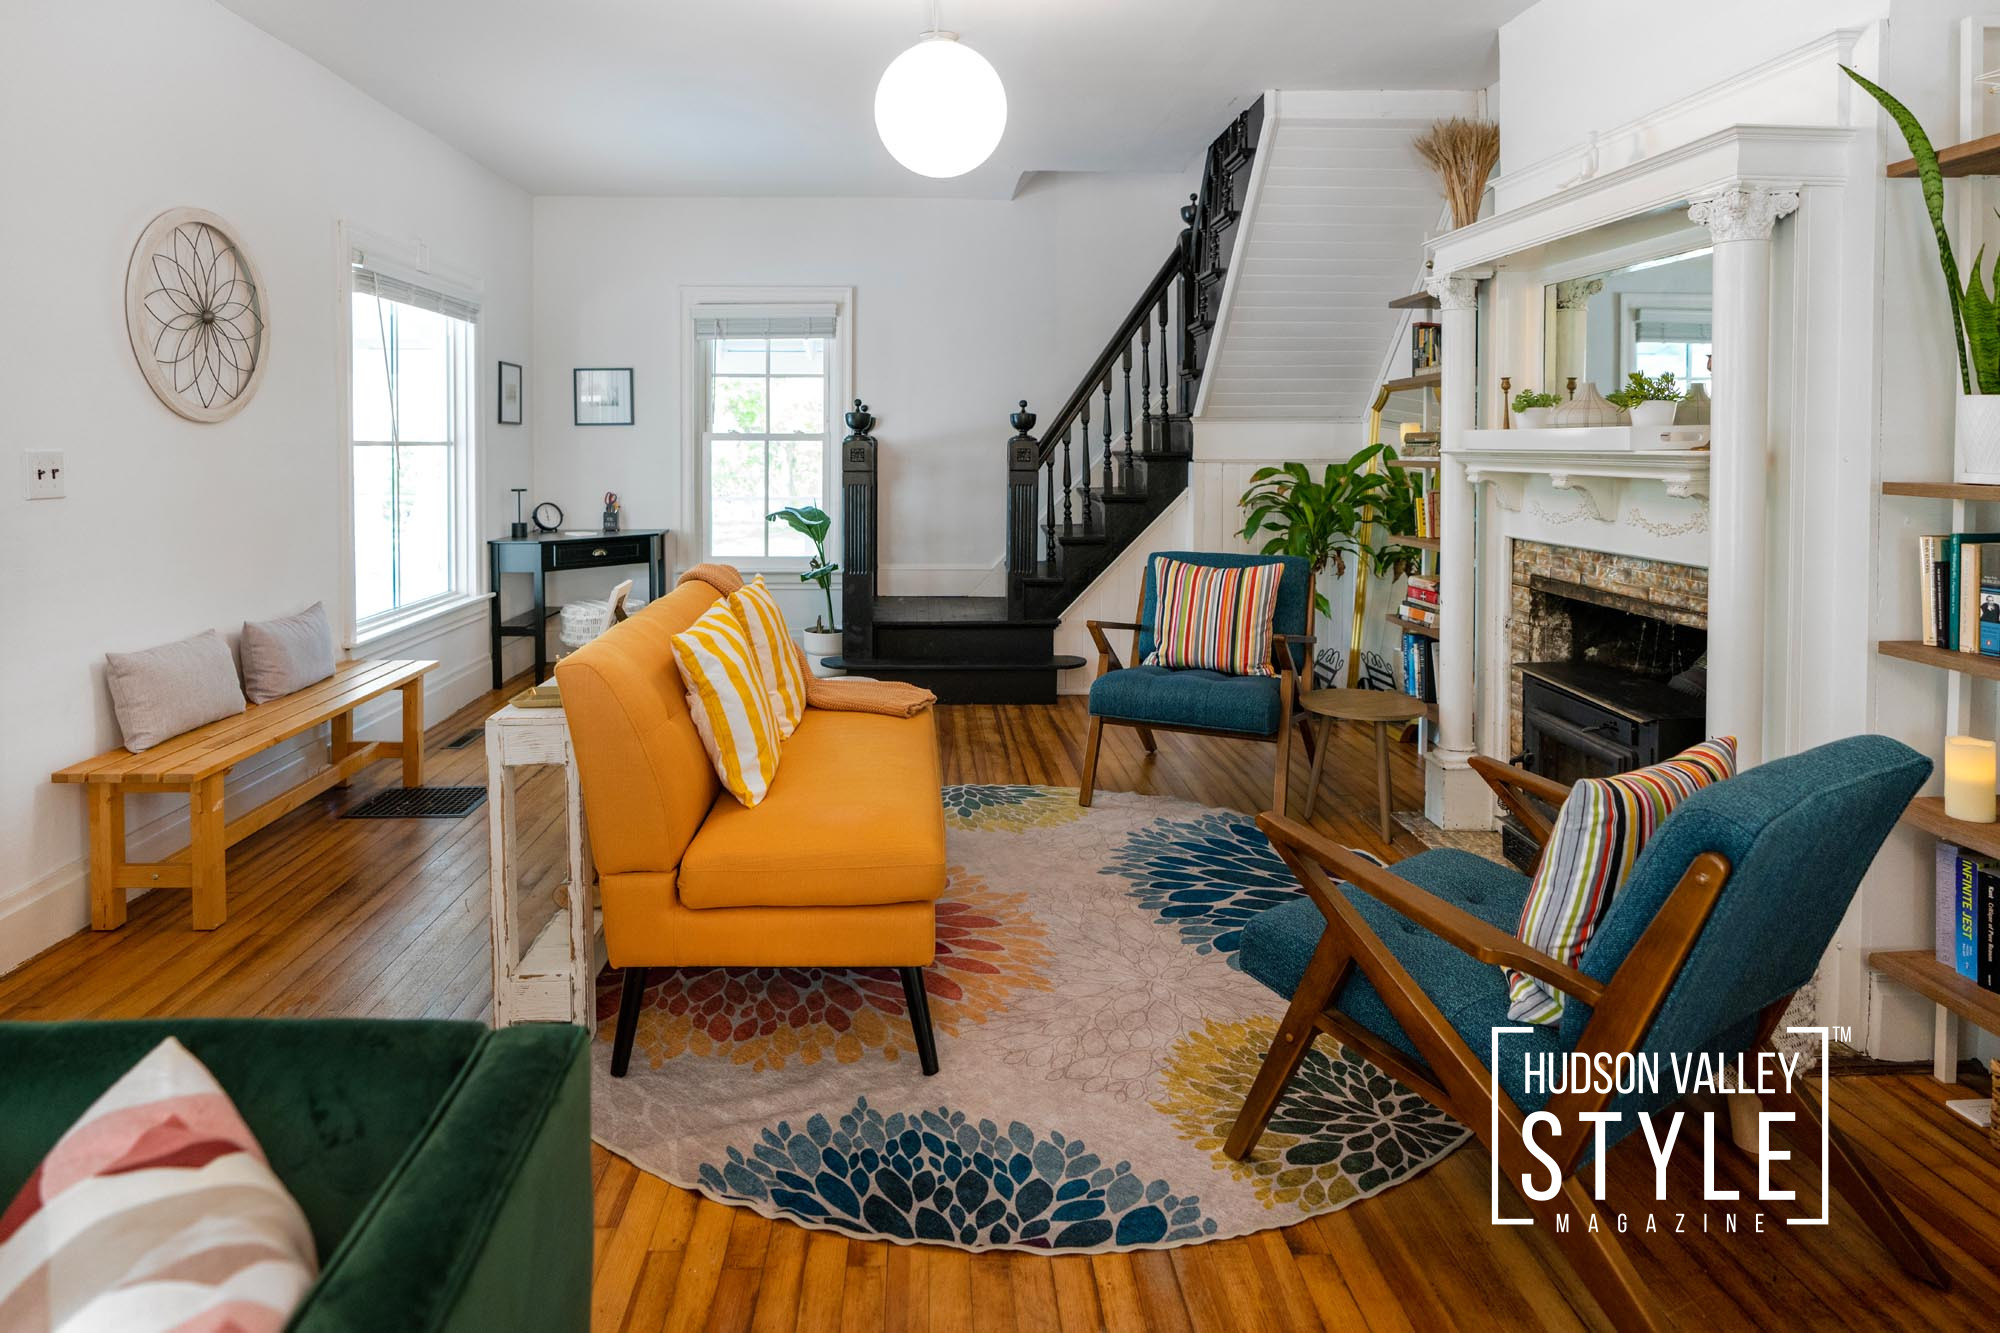 A Glimpse Through My Lens - The Broadview Farmhouse – Airbnb Review by Photographer Maxwell Alexander – Presented by Alluvion Media